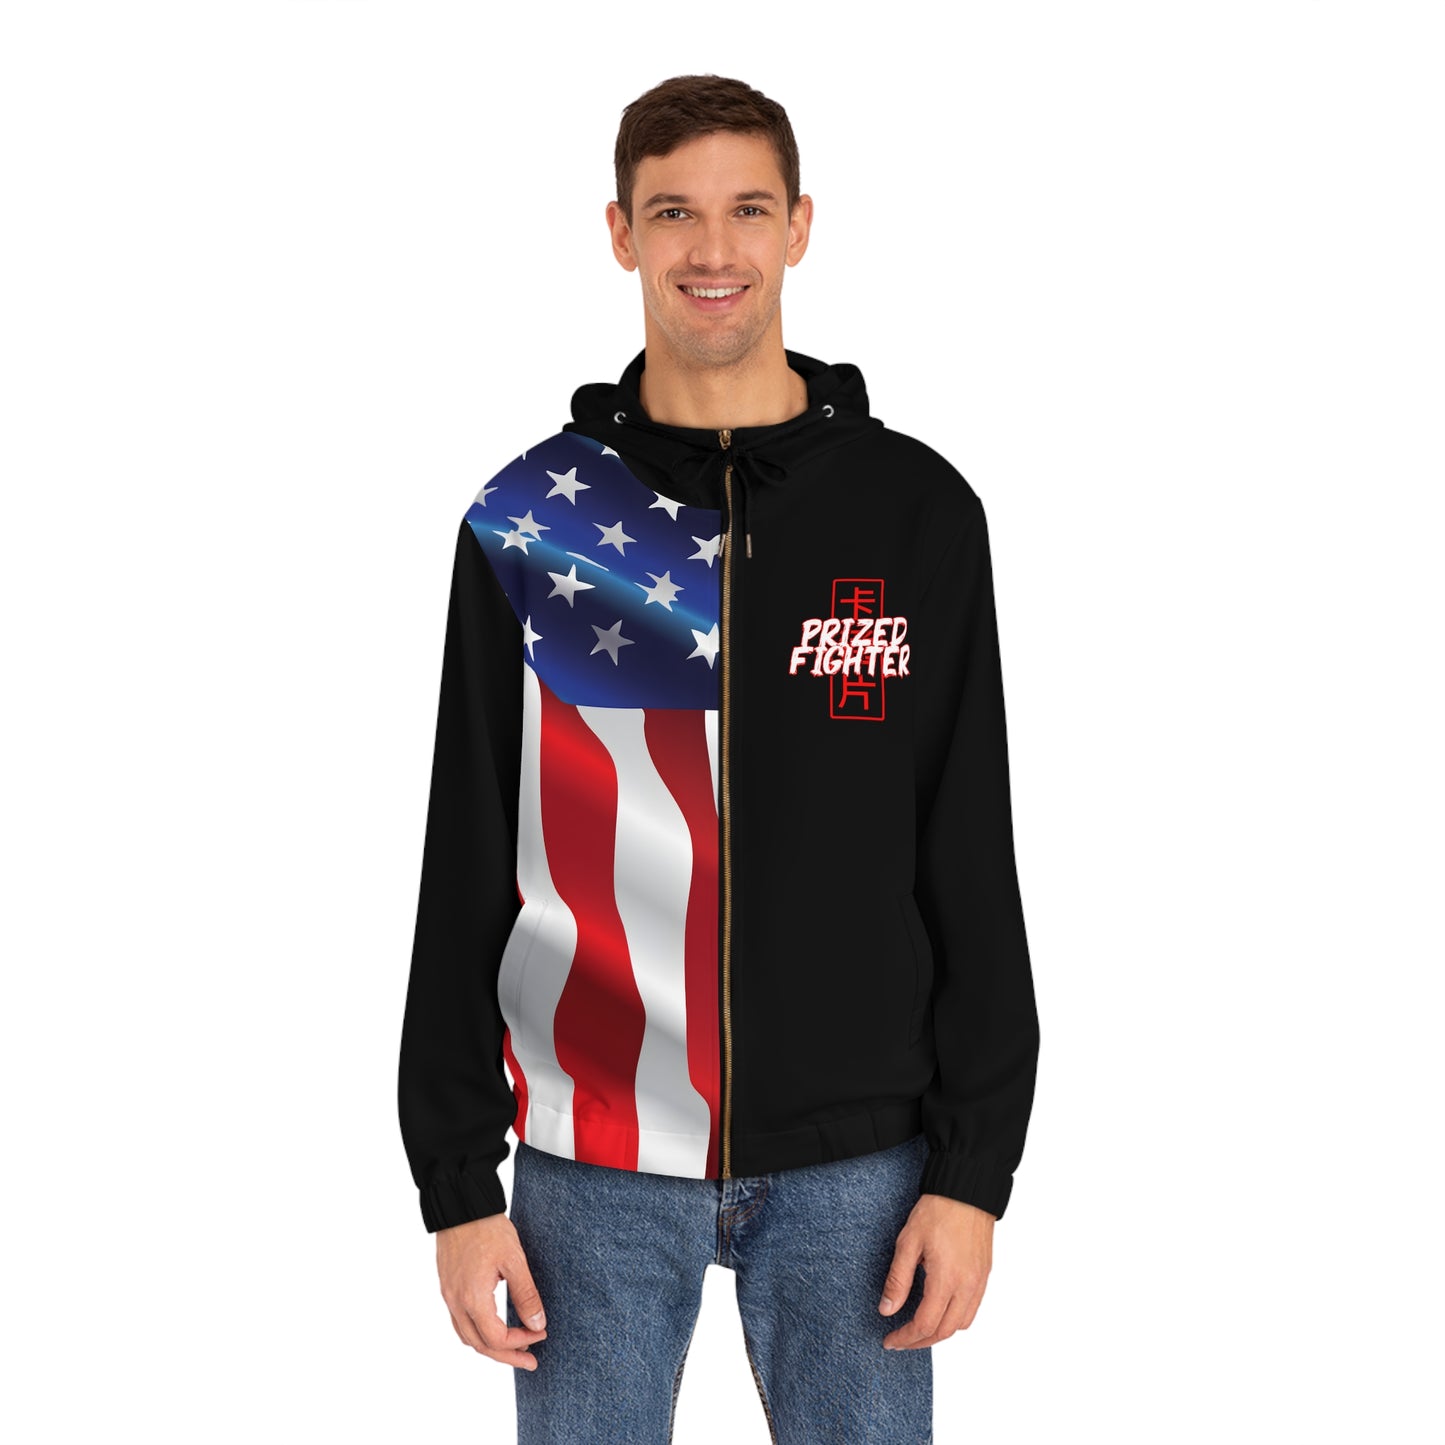 Kǎtōng Piàn - Prized Fighter Collection - America - 007 - Men's Full-Zip Hoodie